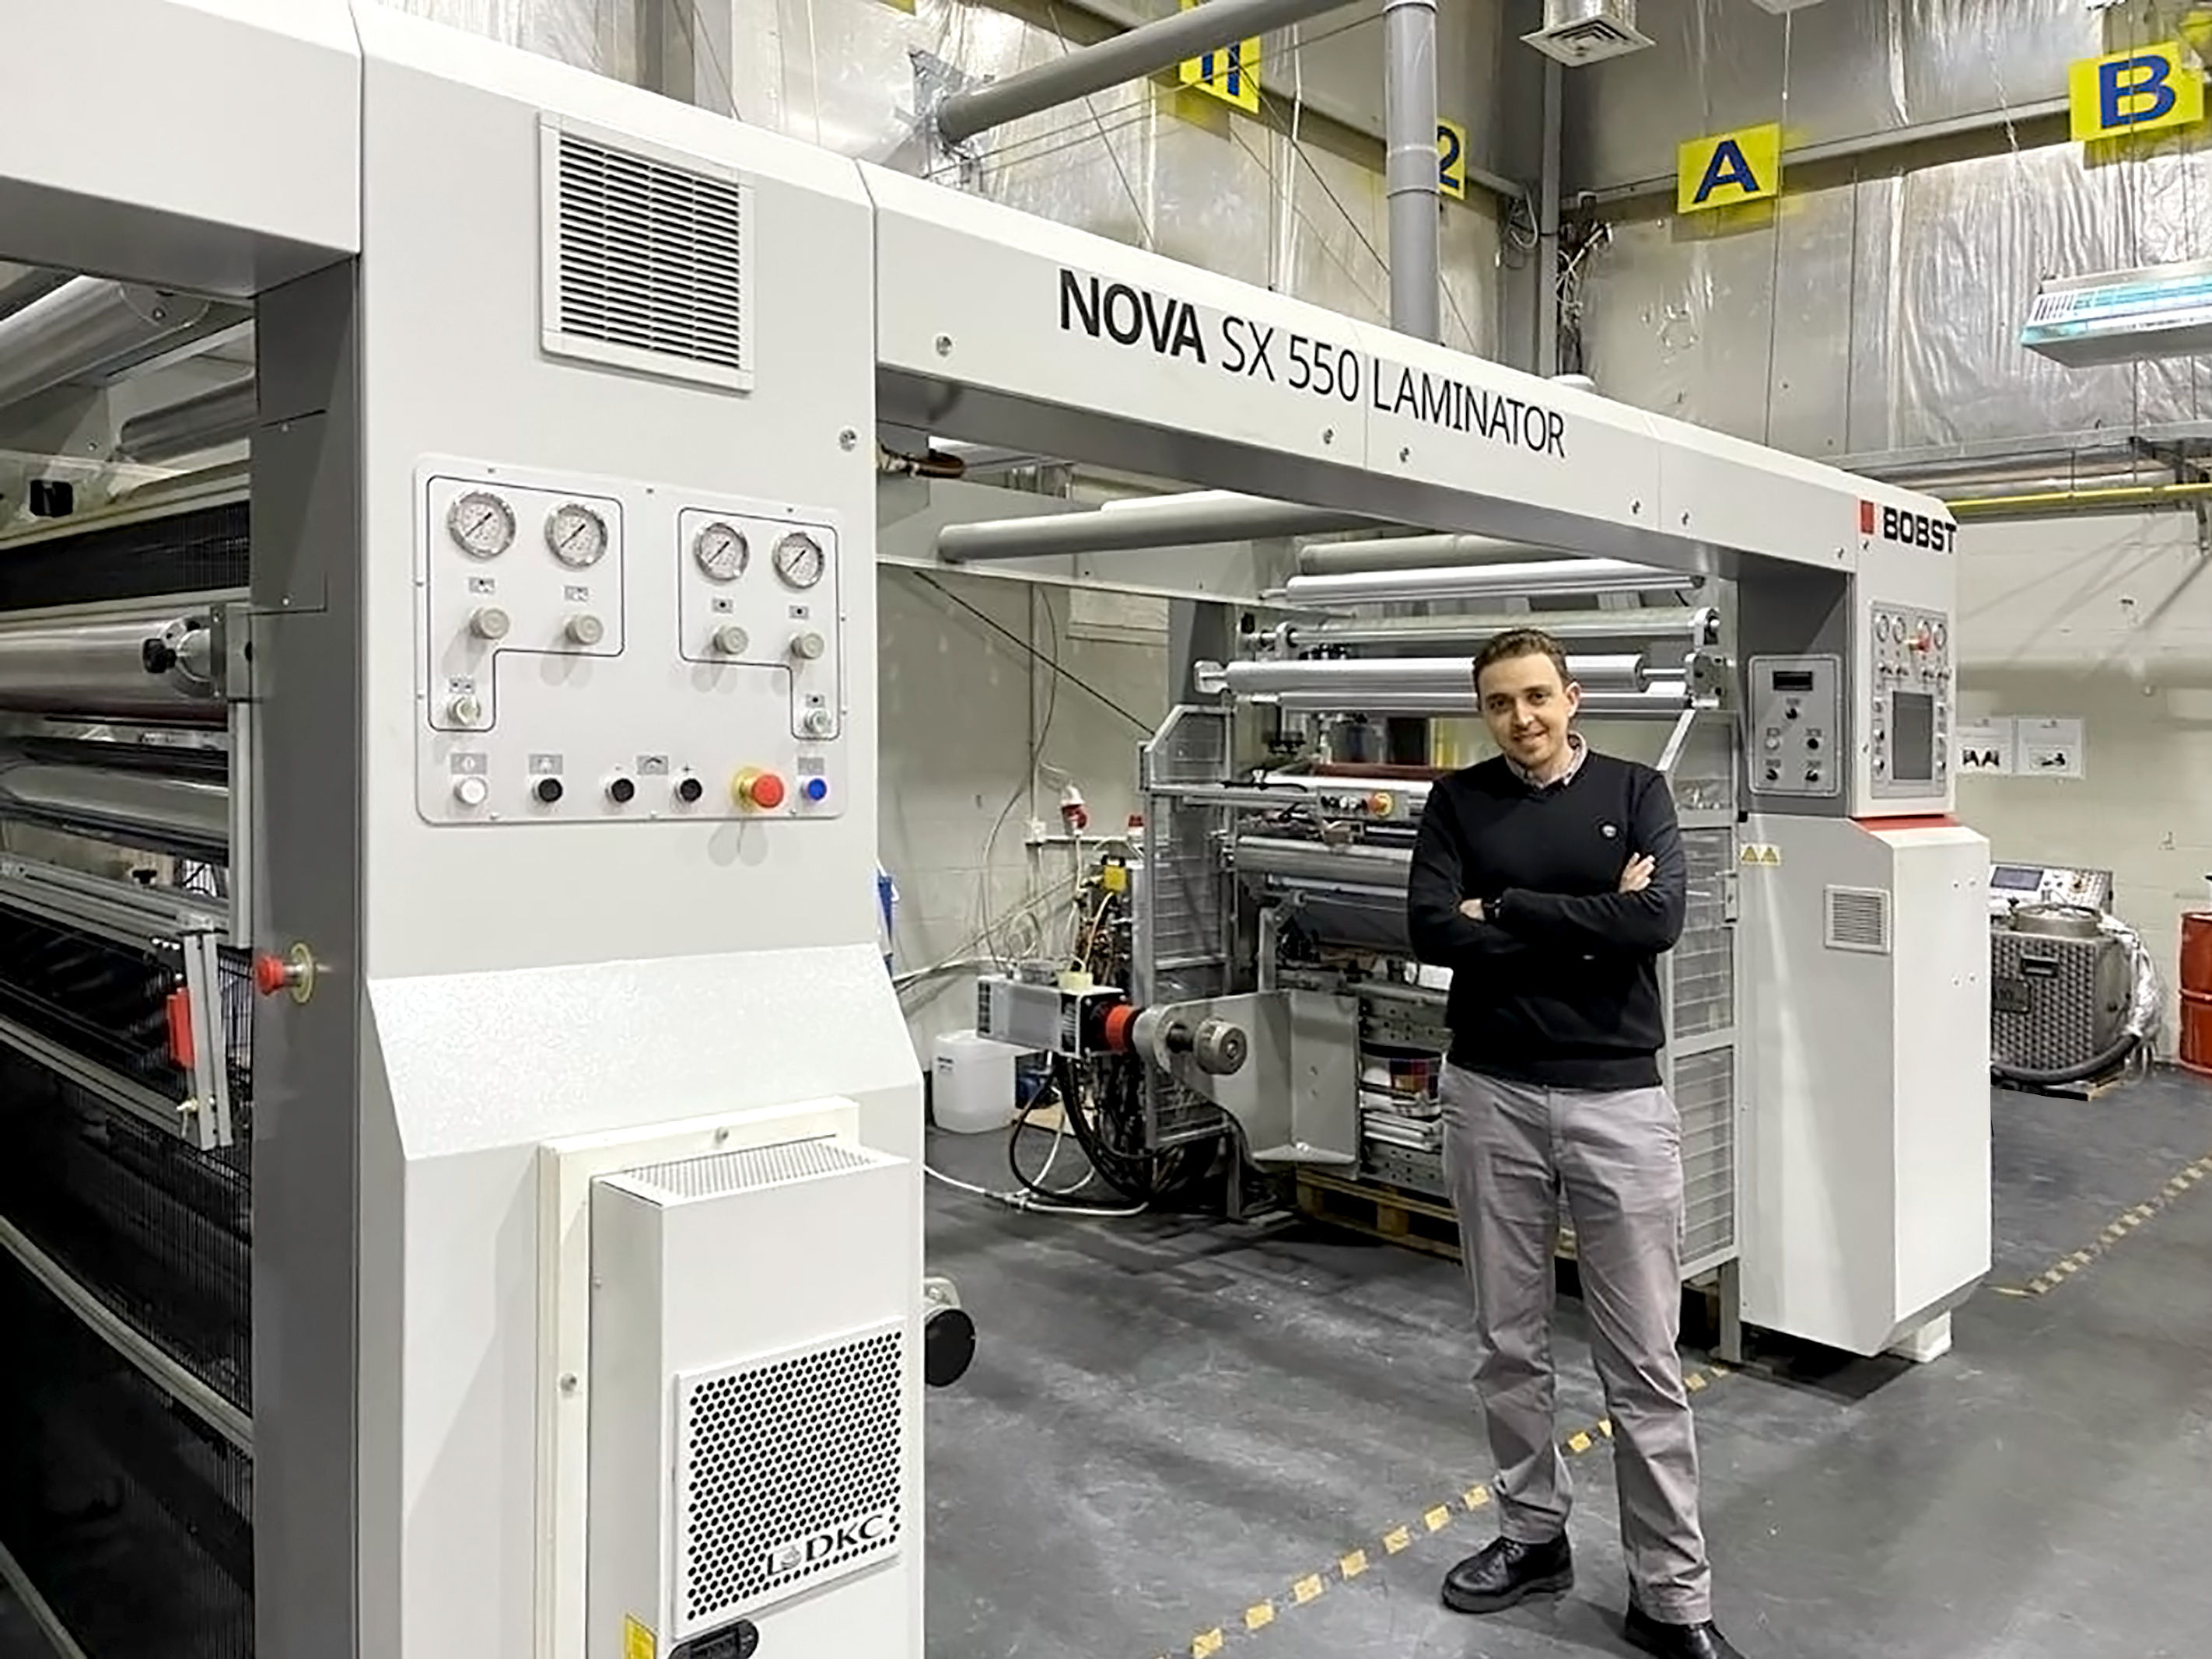 Mr Mohammad Sabha, Plant Manager and Executive Engineer of Digital Labels Jordan in front of the NOVA SX 550 laminator